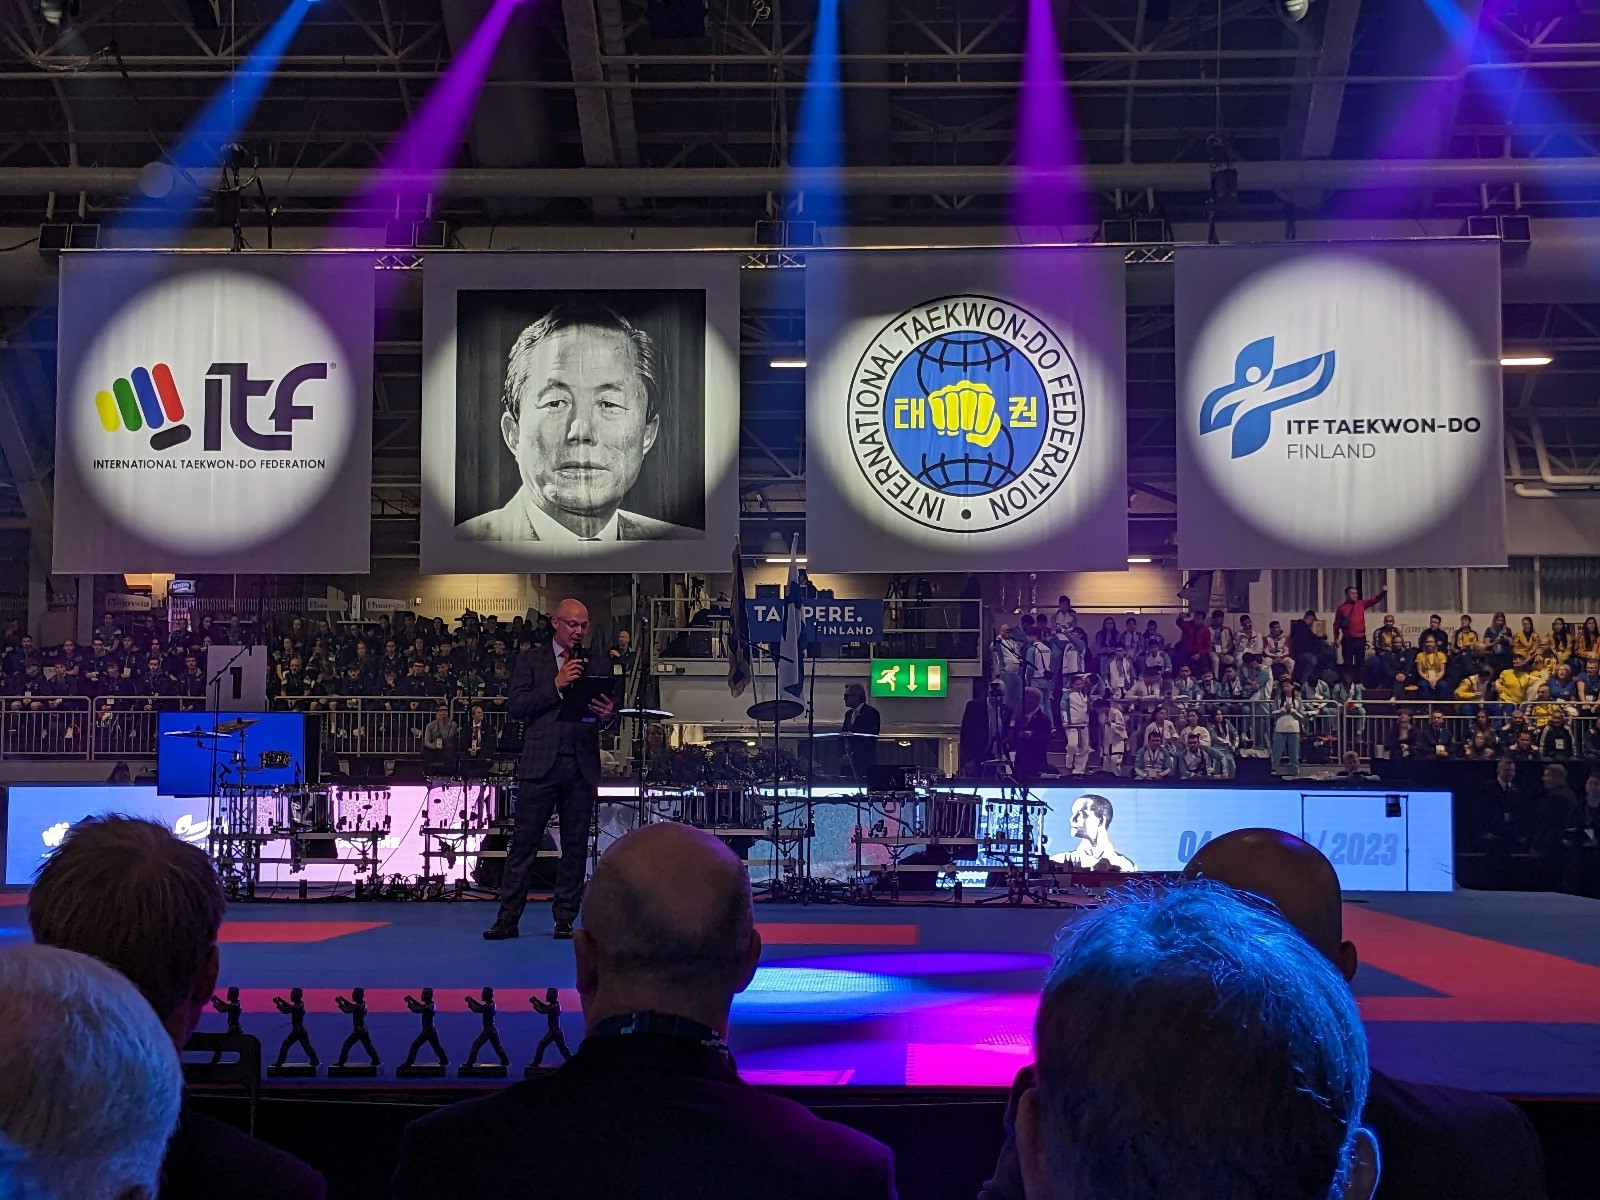 The Opening Ceremony marked the start of the ITF World Championships for more than 1,100 athletes after a two-year delay due to the COVID-19 pandemic ©ITF